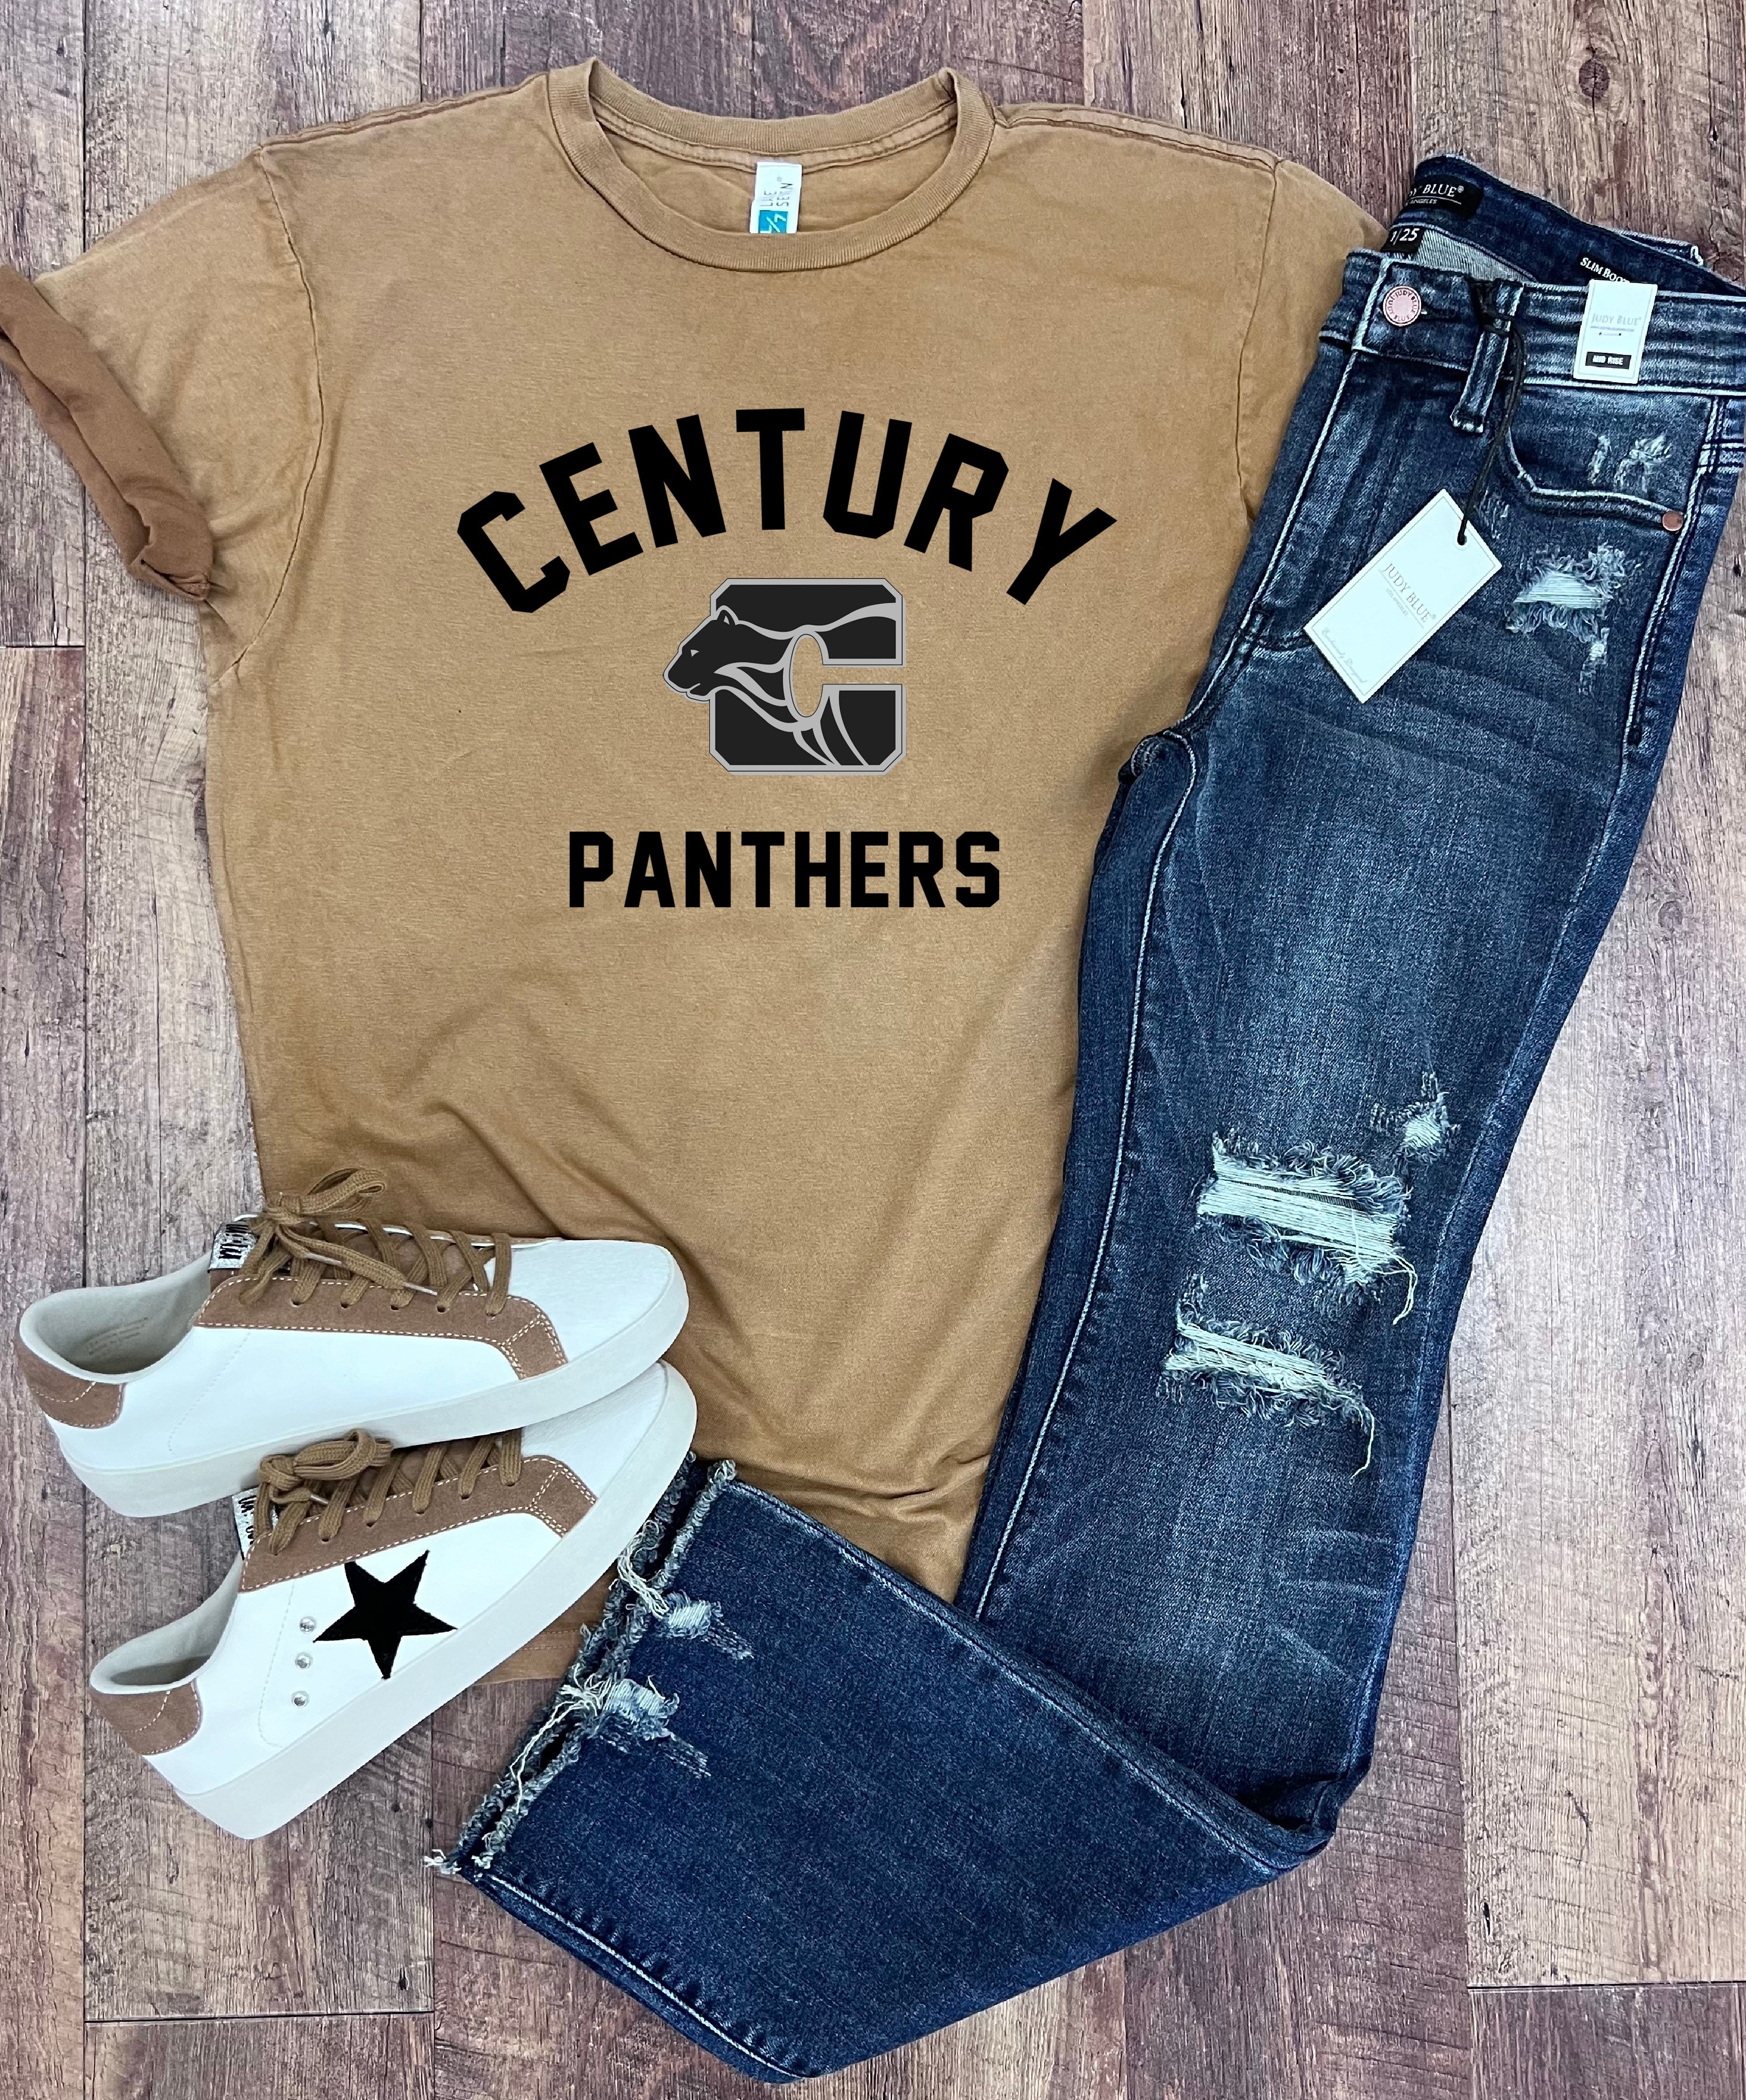 Century Panthers Tee in Mineral Sandstone